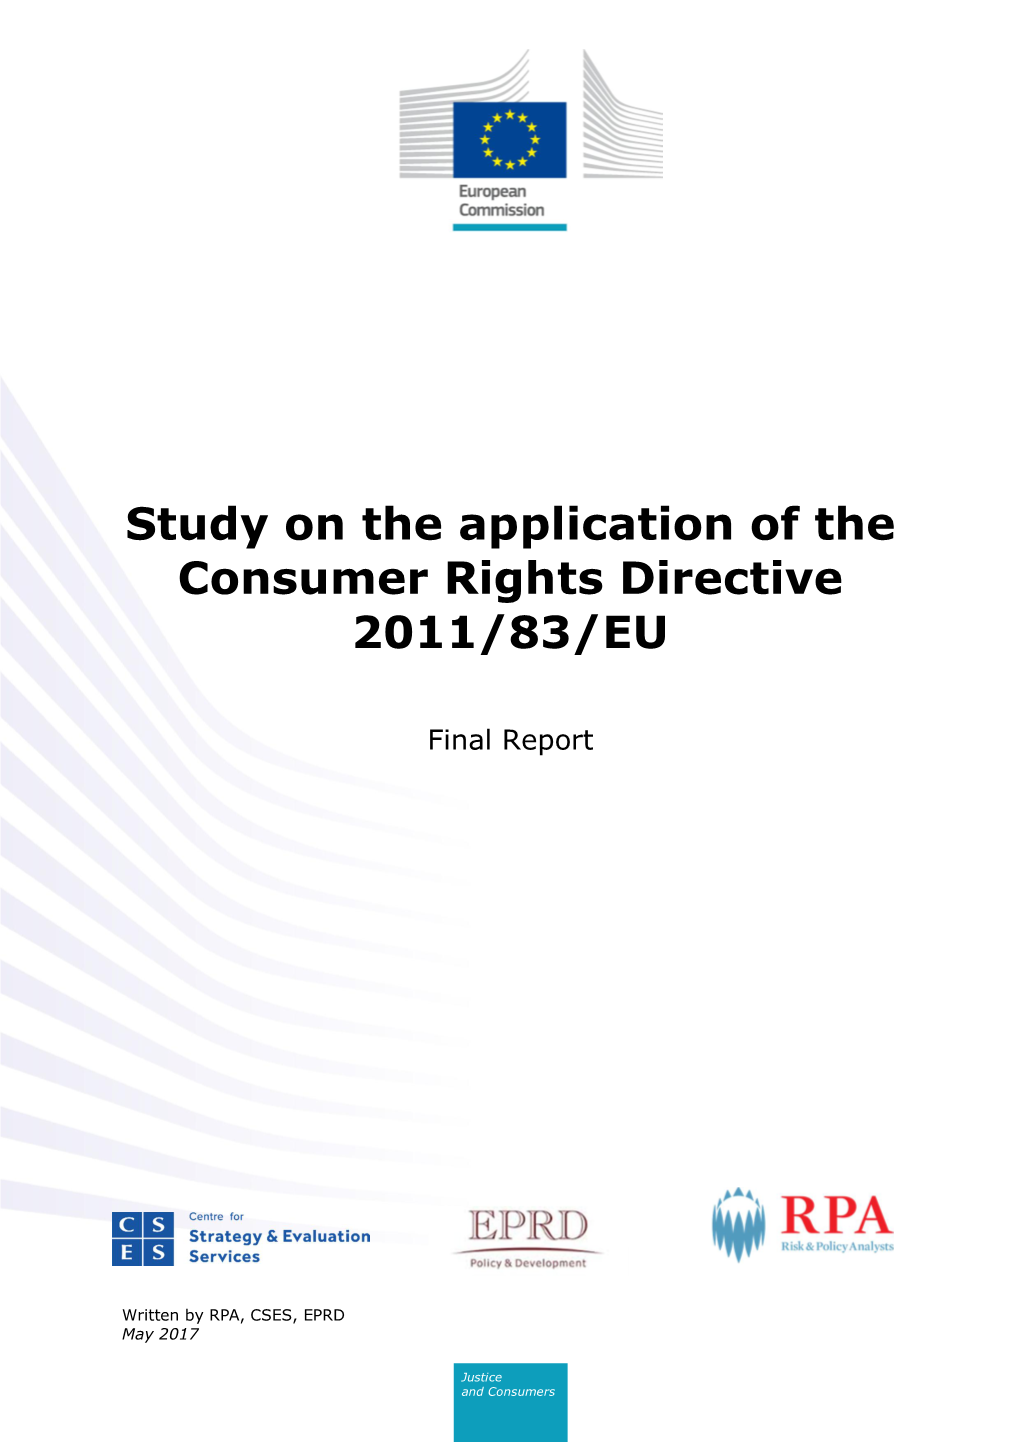 Study on the Application of the Consumer Rights Directive 2011/83/EU